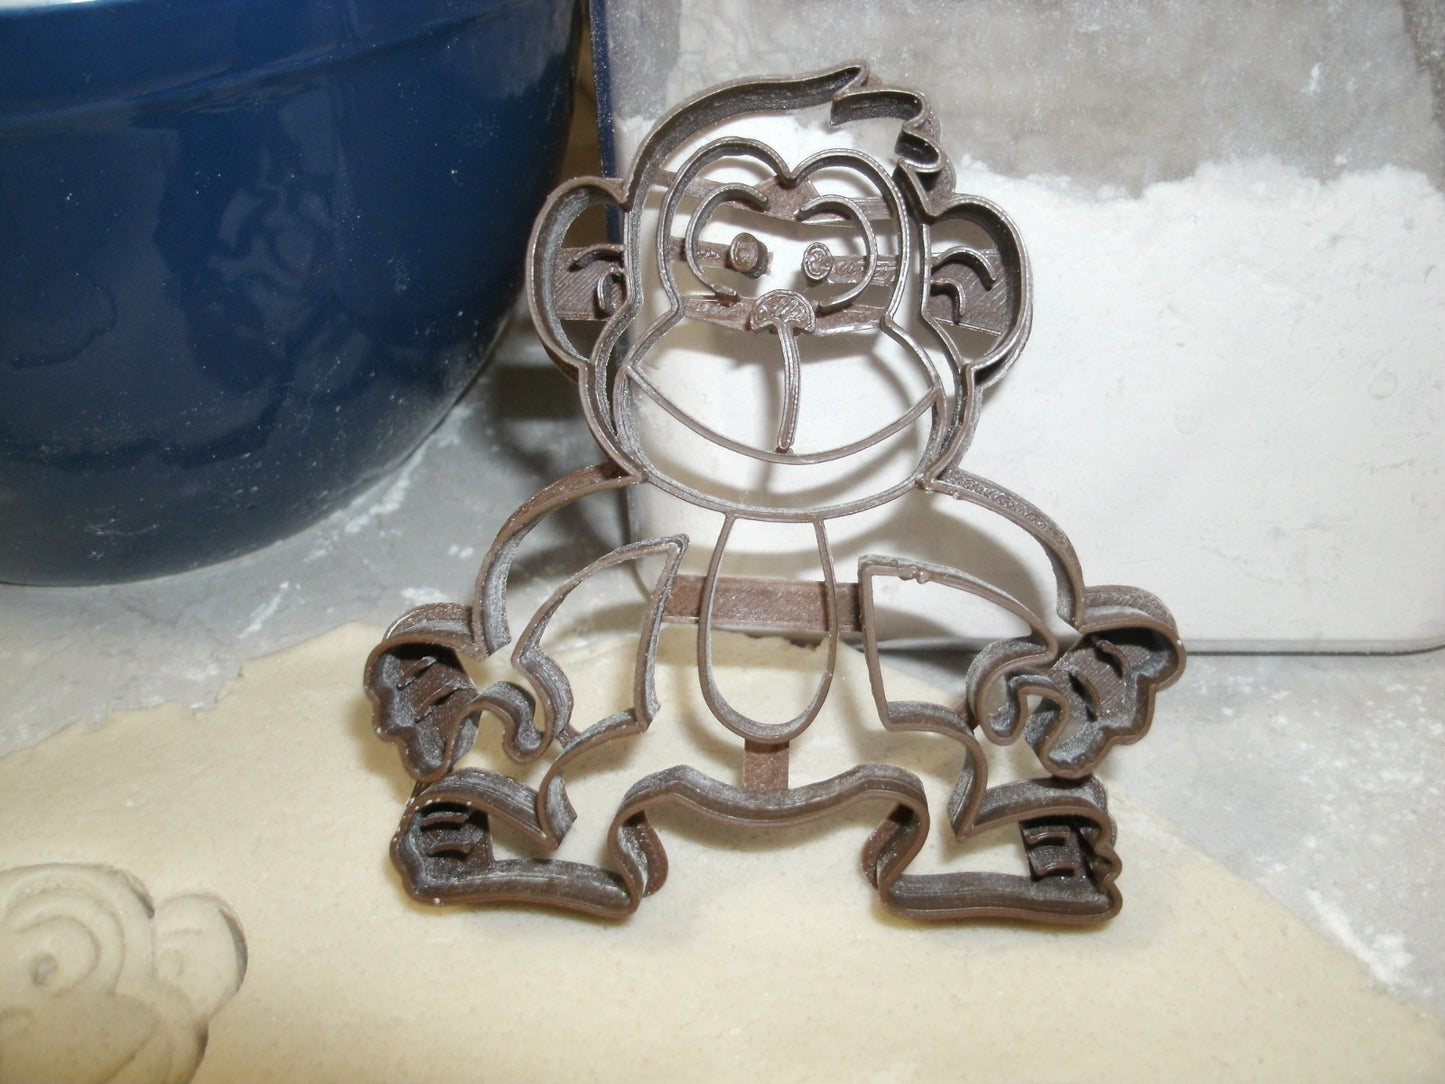 Monkey Primate Jungle Rain Forest Zoo Animal Cookie Cutter Made in USA PR575